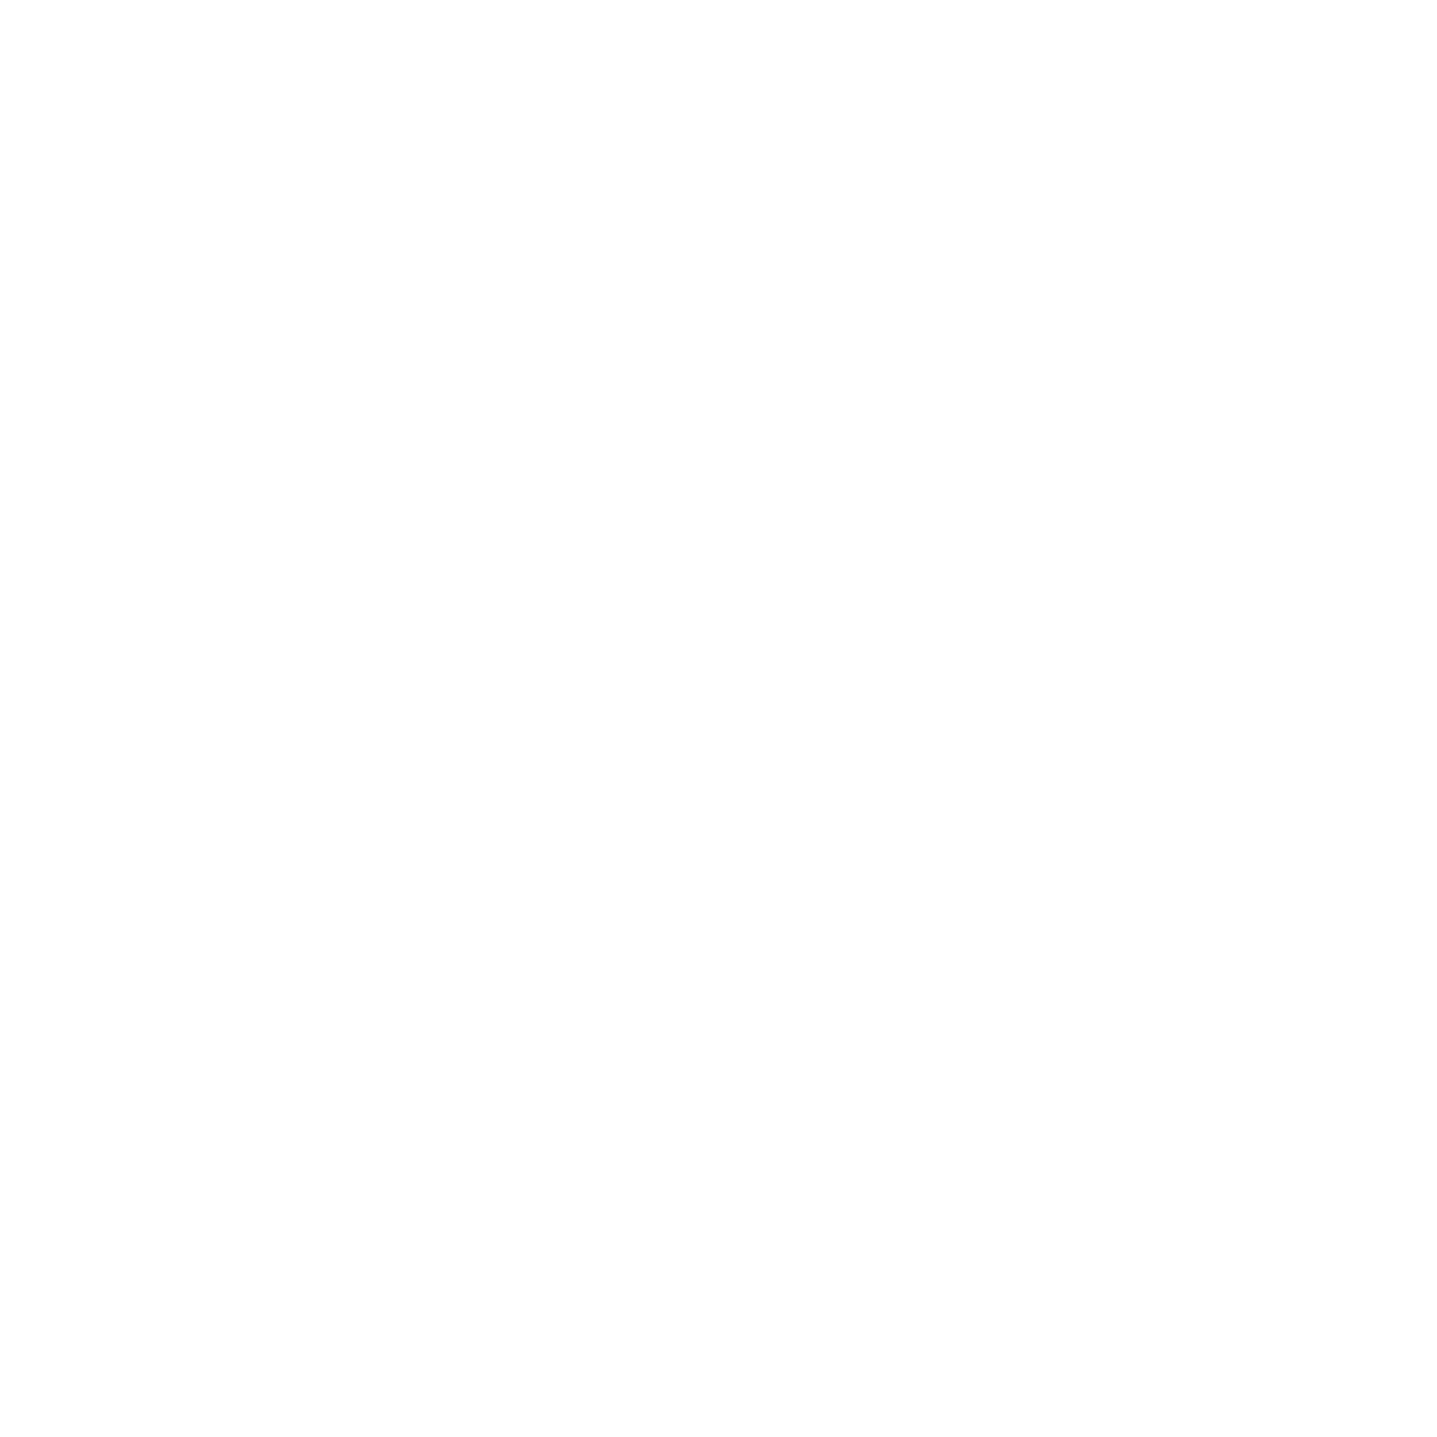 Supporting the sustainability of Black-led and Black-centered grassroots organizations already doing the work